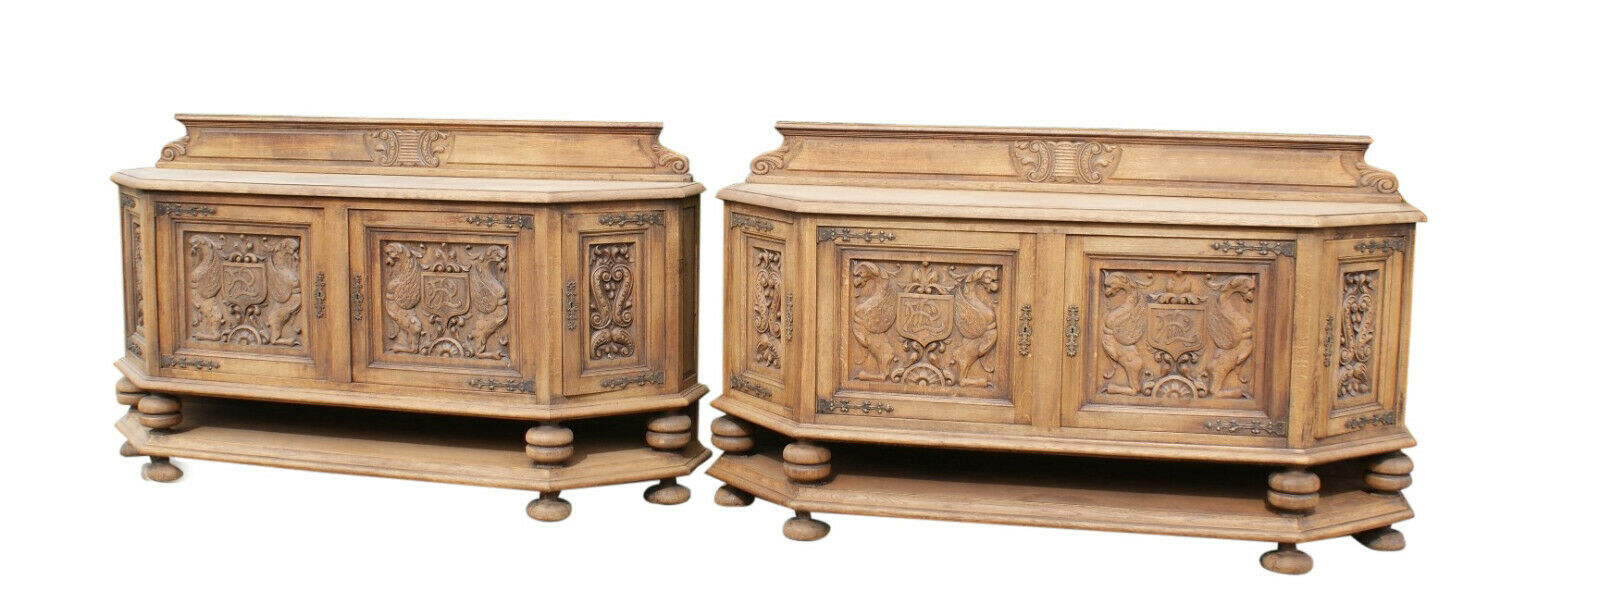 Antique Pair of Matching French Sideboards or Servers, Gargoyles, 1920's, Oak